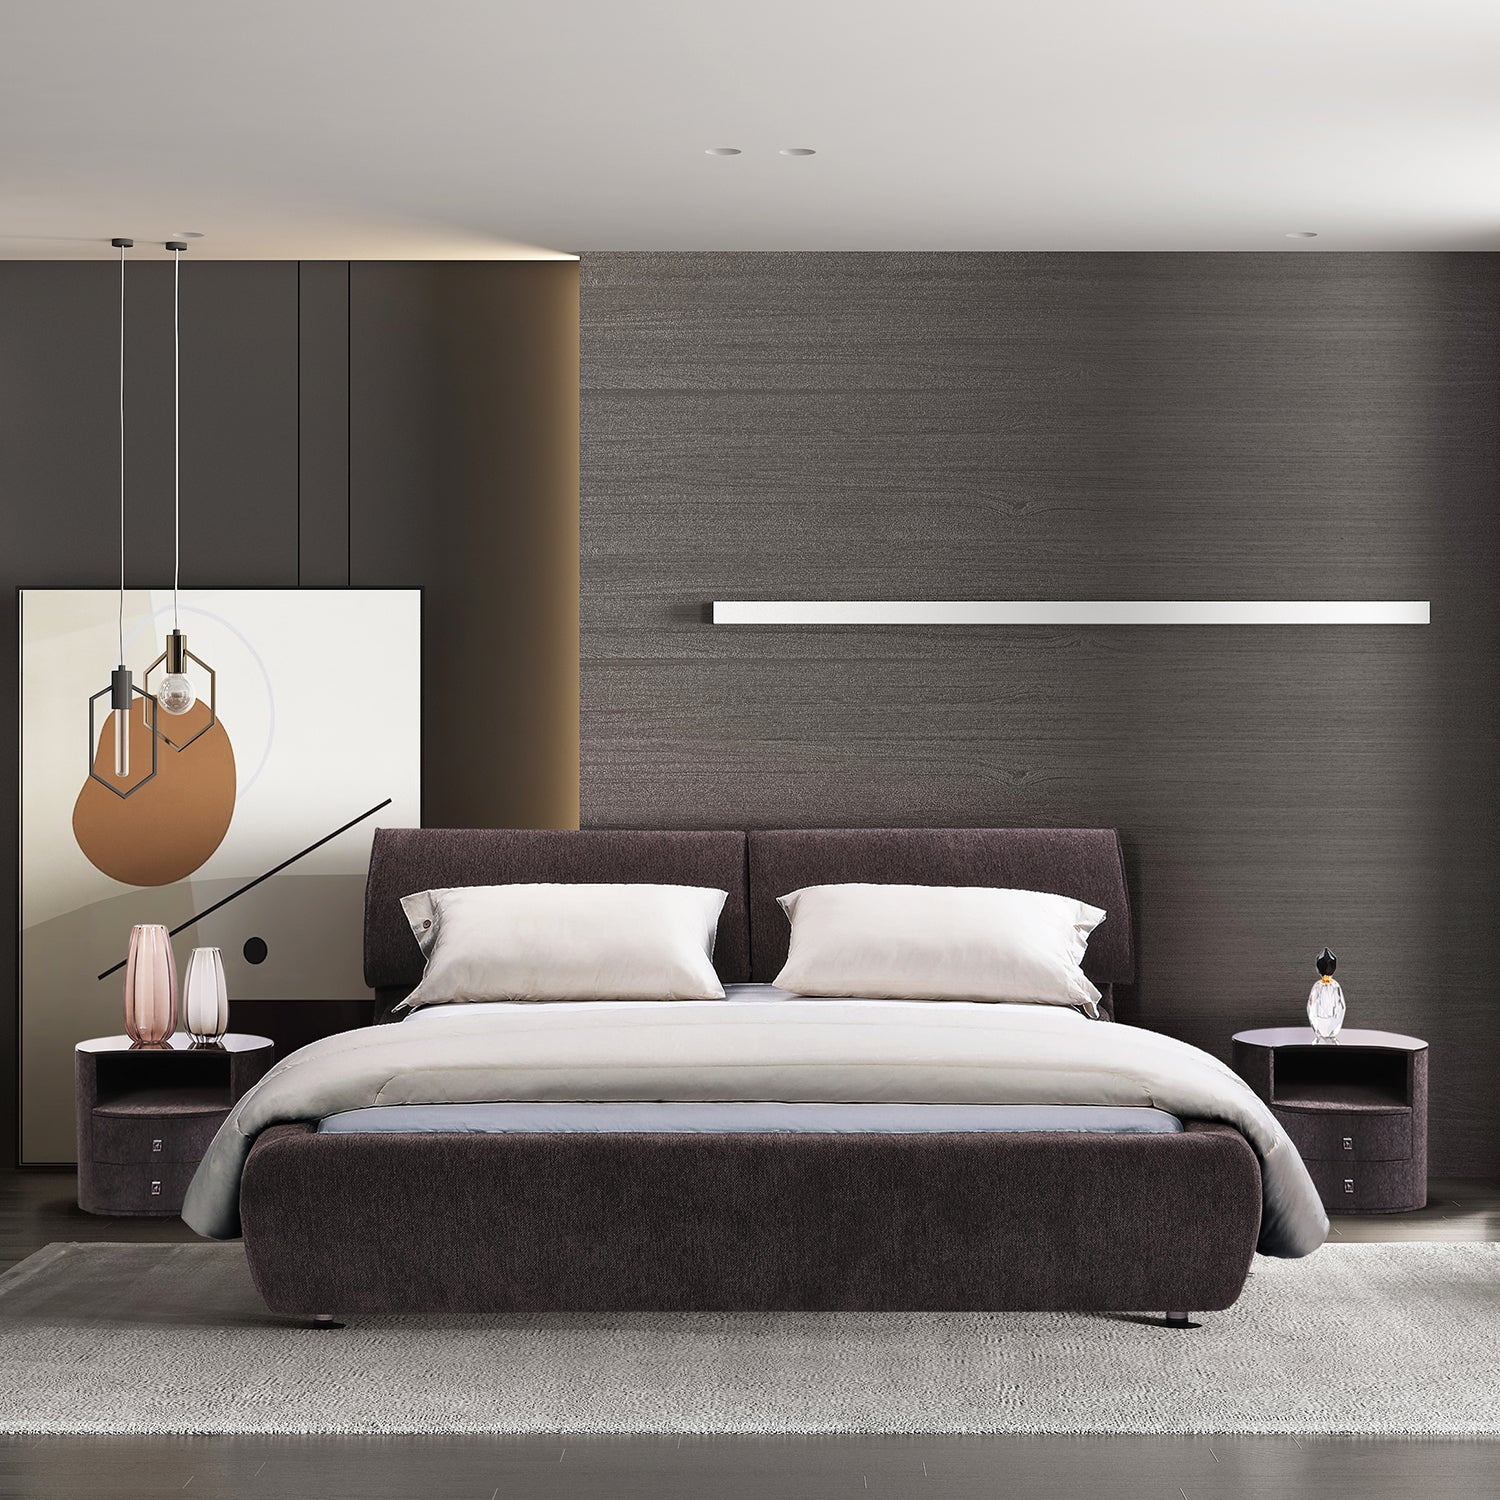 Bed Frame BZZ4-117 in a modern bedroom setting with dark gray fabric upholstery, matching nightstands, white pillows, light gray comforter, pendant lights, abstract wall art, and a textured dark wall.